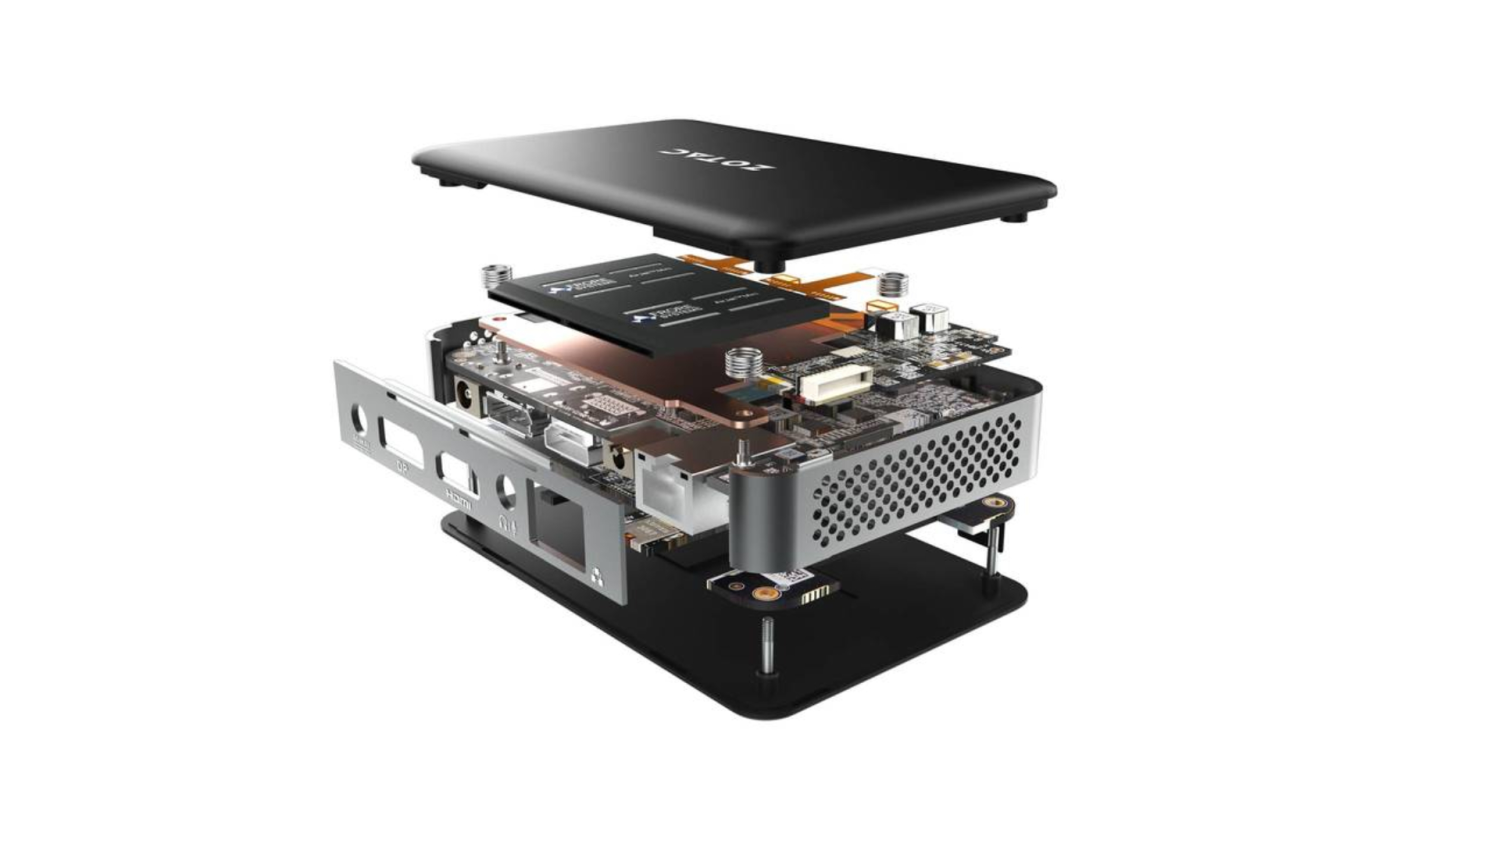 TweakTown Enlarged Image - ZBOX PI430AJ with AirJet cooling, the world's smaller Mini PC, image credit: Zotac.